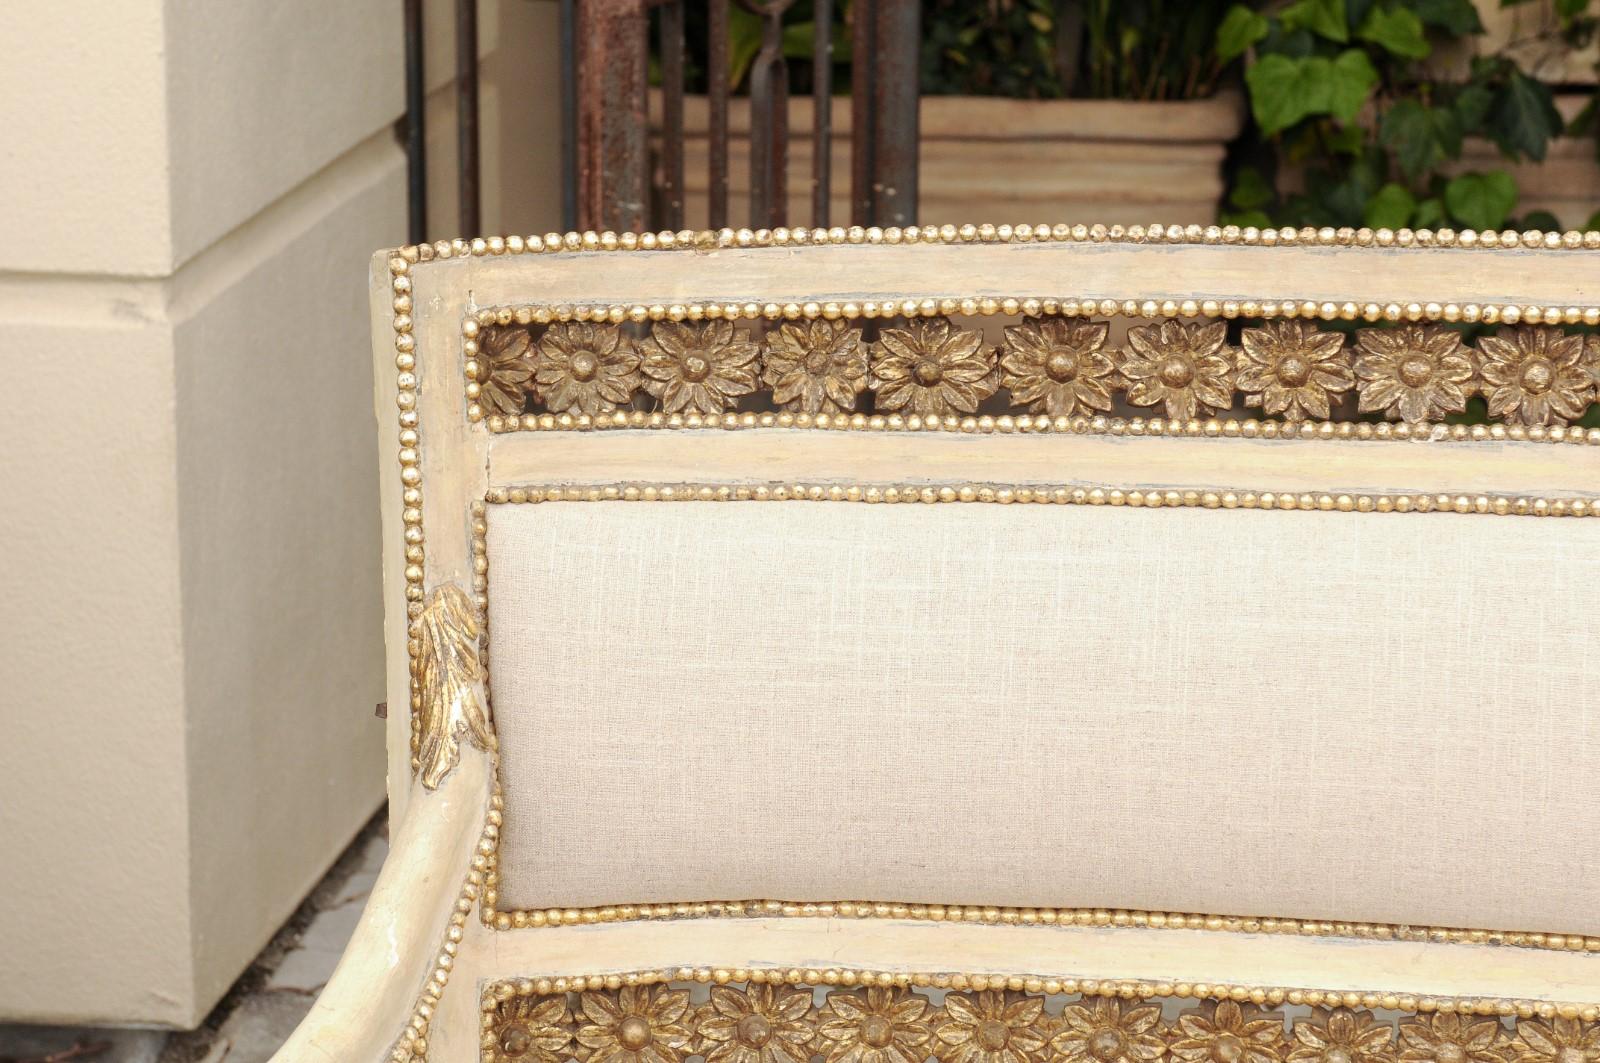 Upholstery Italian Neoclassical 1800s Settee with Original Paint and Gilt Floral Motifs